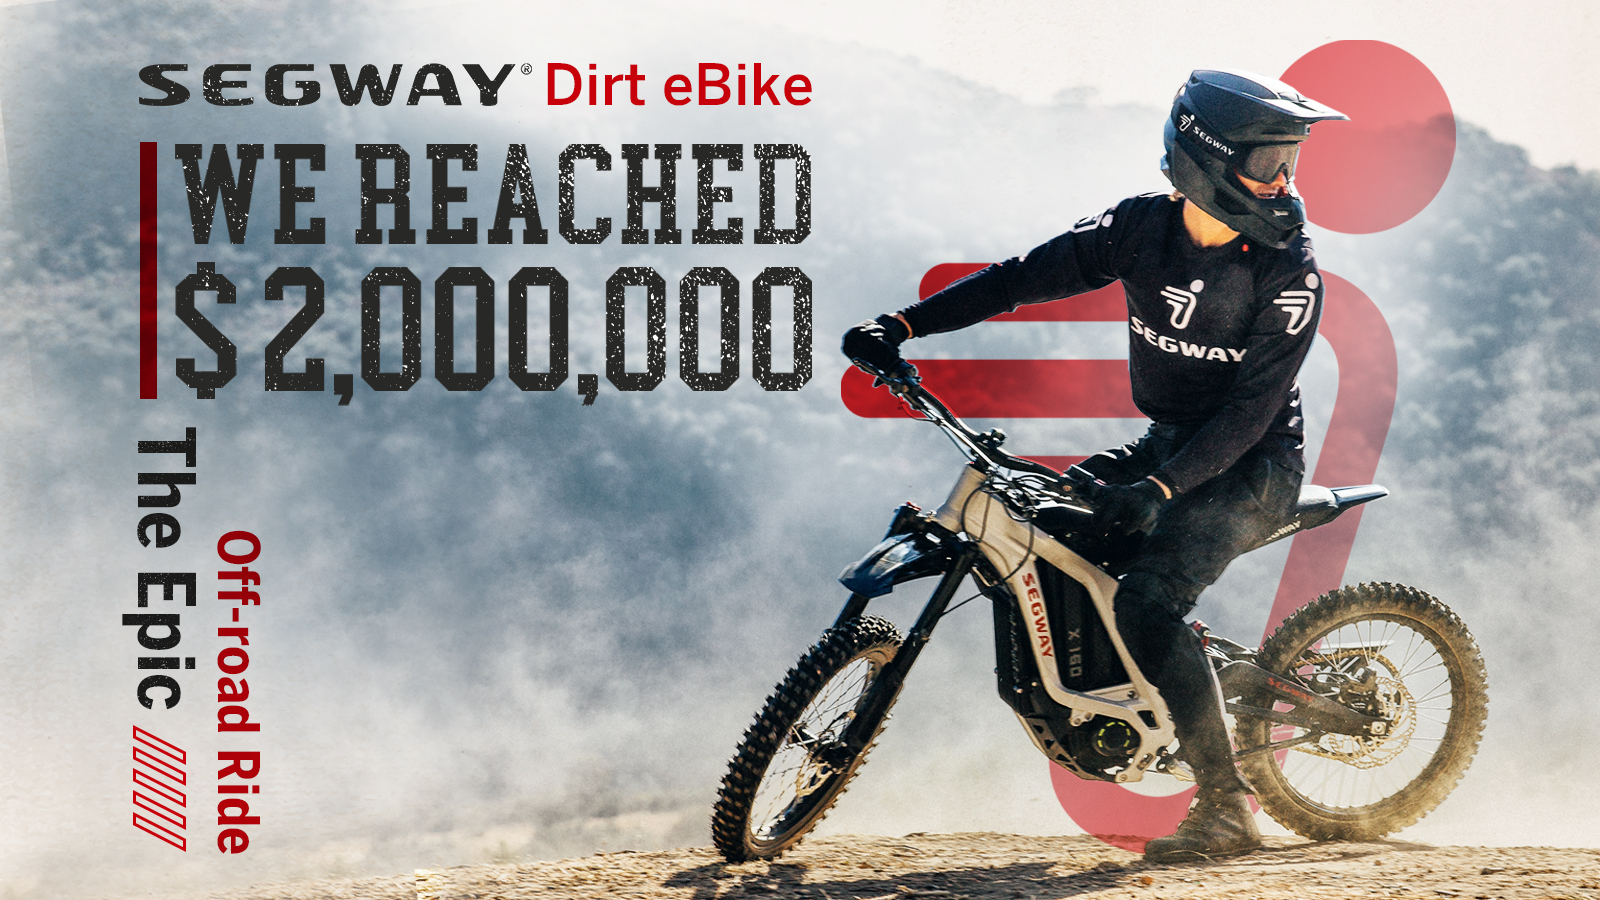 We Reached $2,000,000 Segway Dirt eBike The Epic Off-road Ride